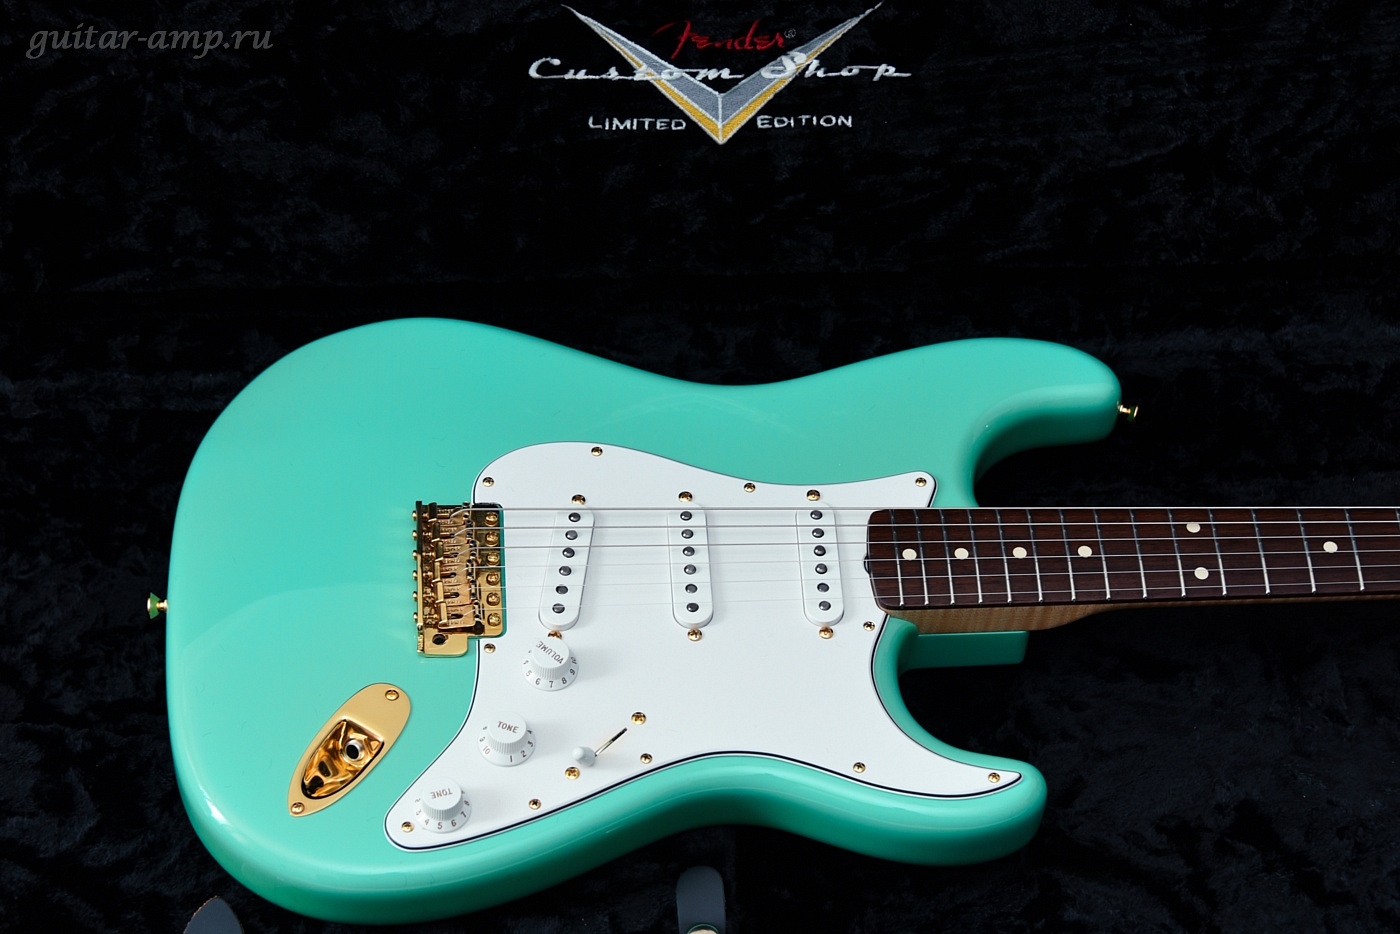 Fender Custom Shop 1960 Stratocaster Seafoam Matched Headstock Limited Edition 2010